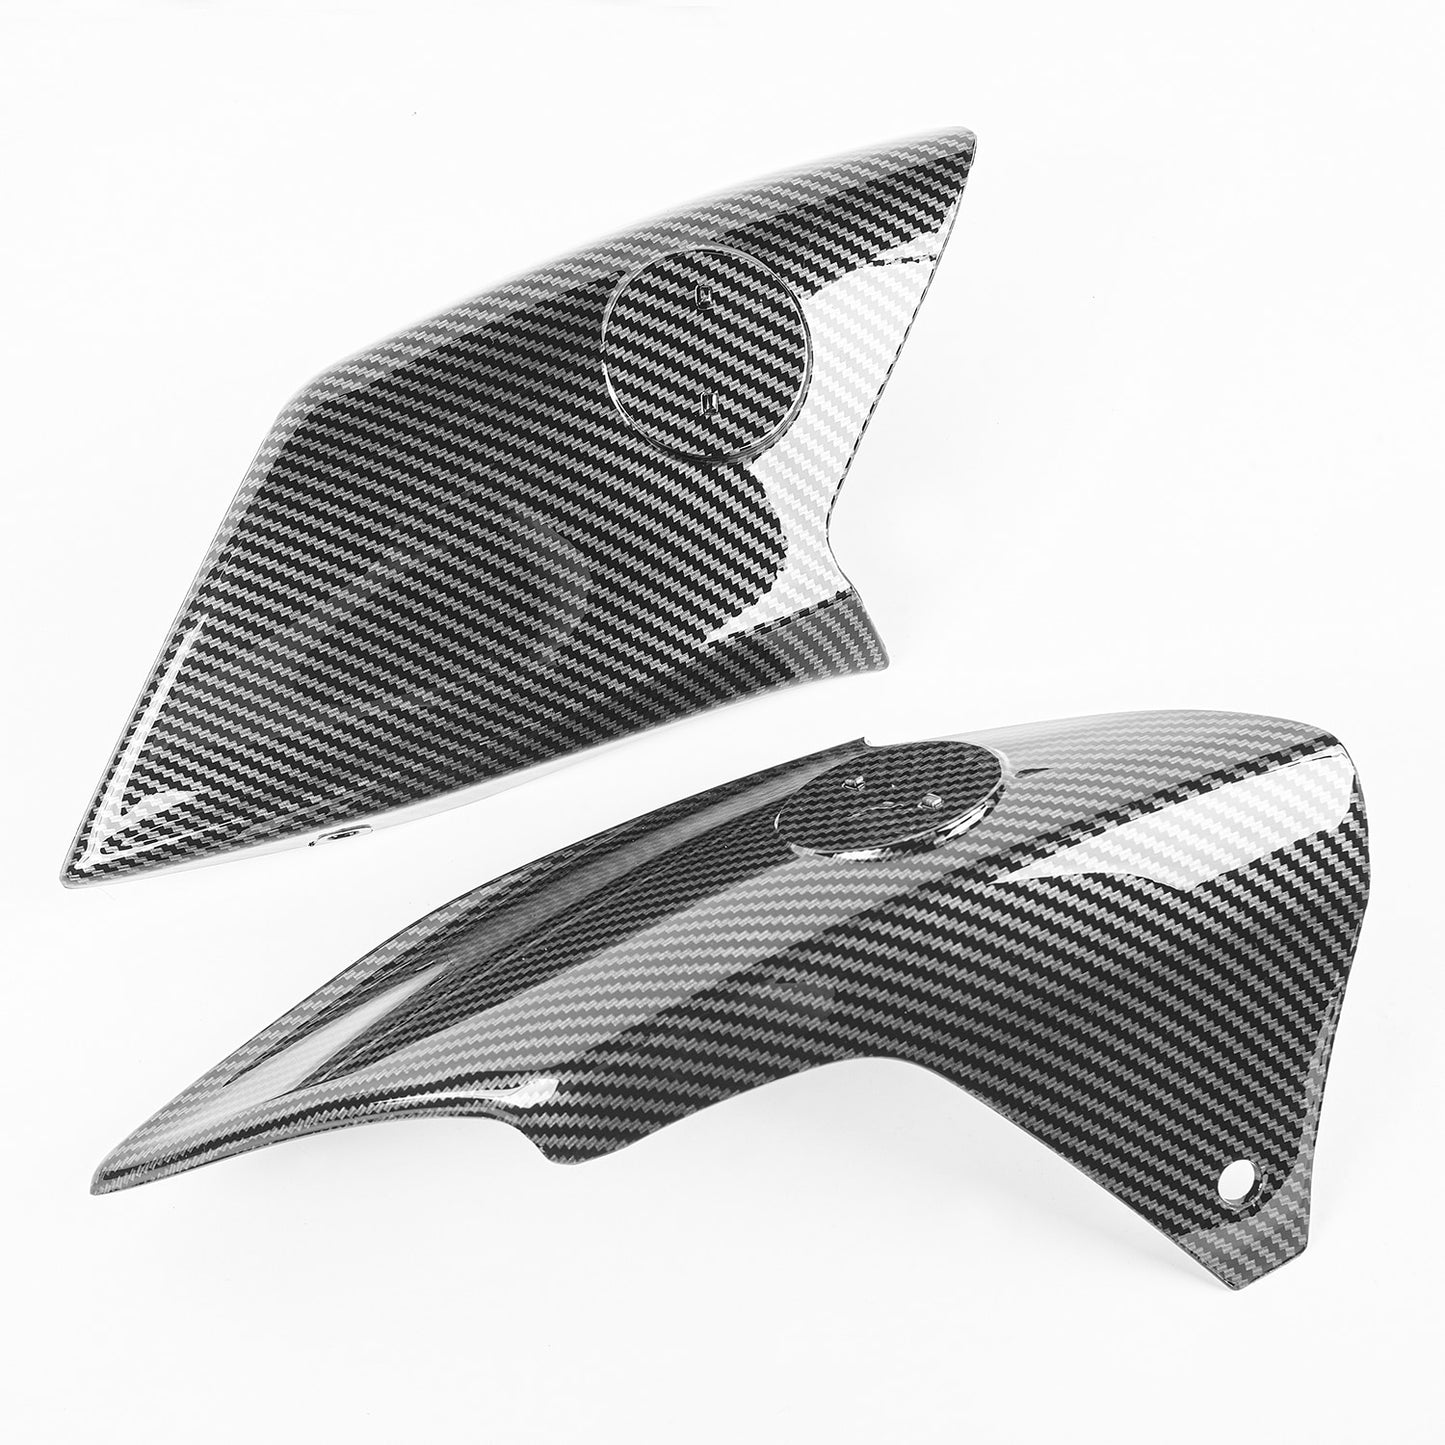 Wolfline MT09 Fuel Gas Tank Front Side Cover Trim Cowl For Yamaha MT 09 MT-09 SP 2021 2022 2023 Motorcycle Fuel Cap Fairing Accessories